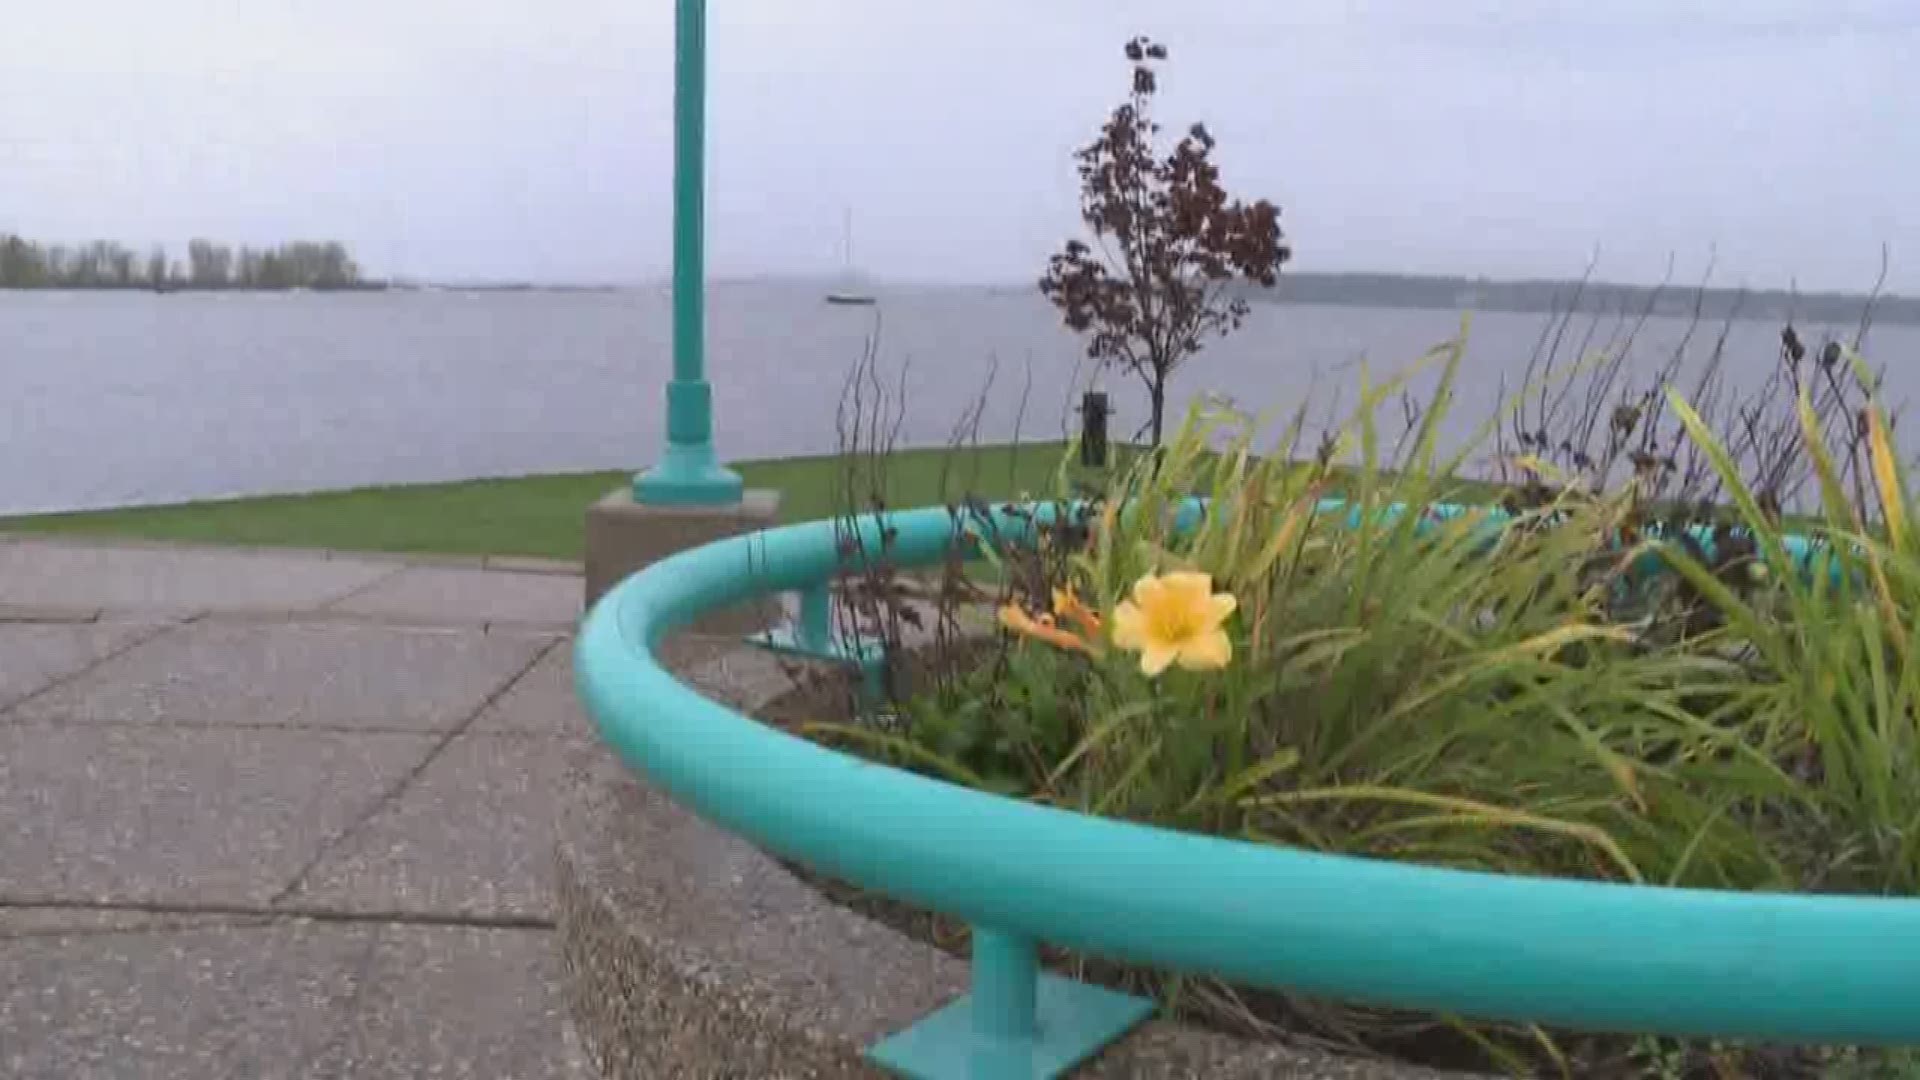 Tourists continue to spend more and more money in Muskegon County each year.